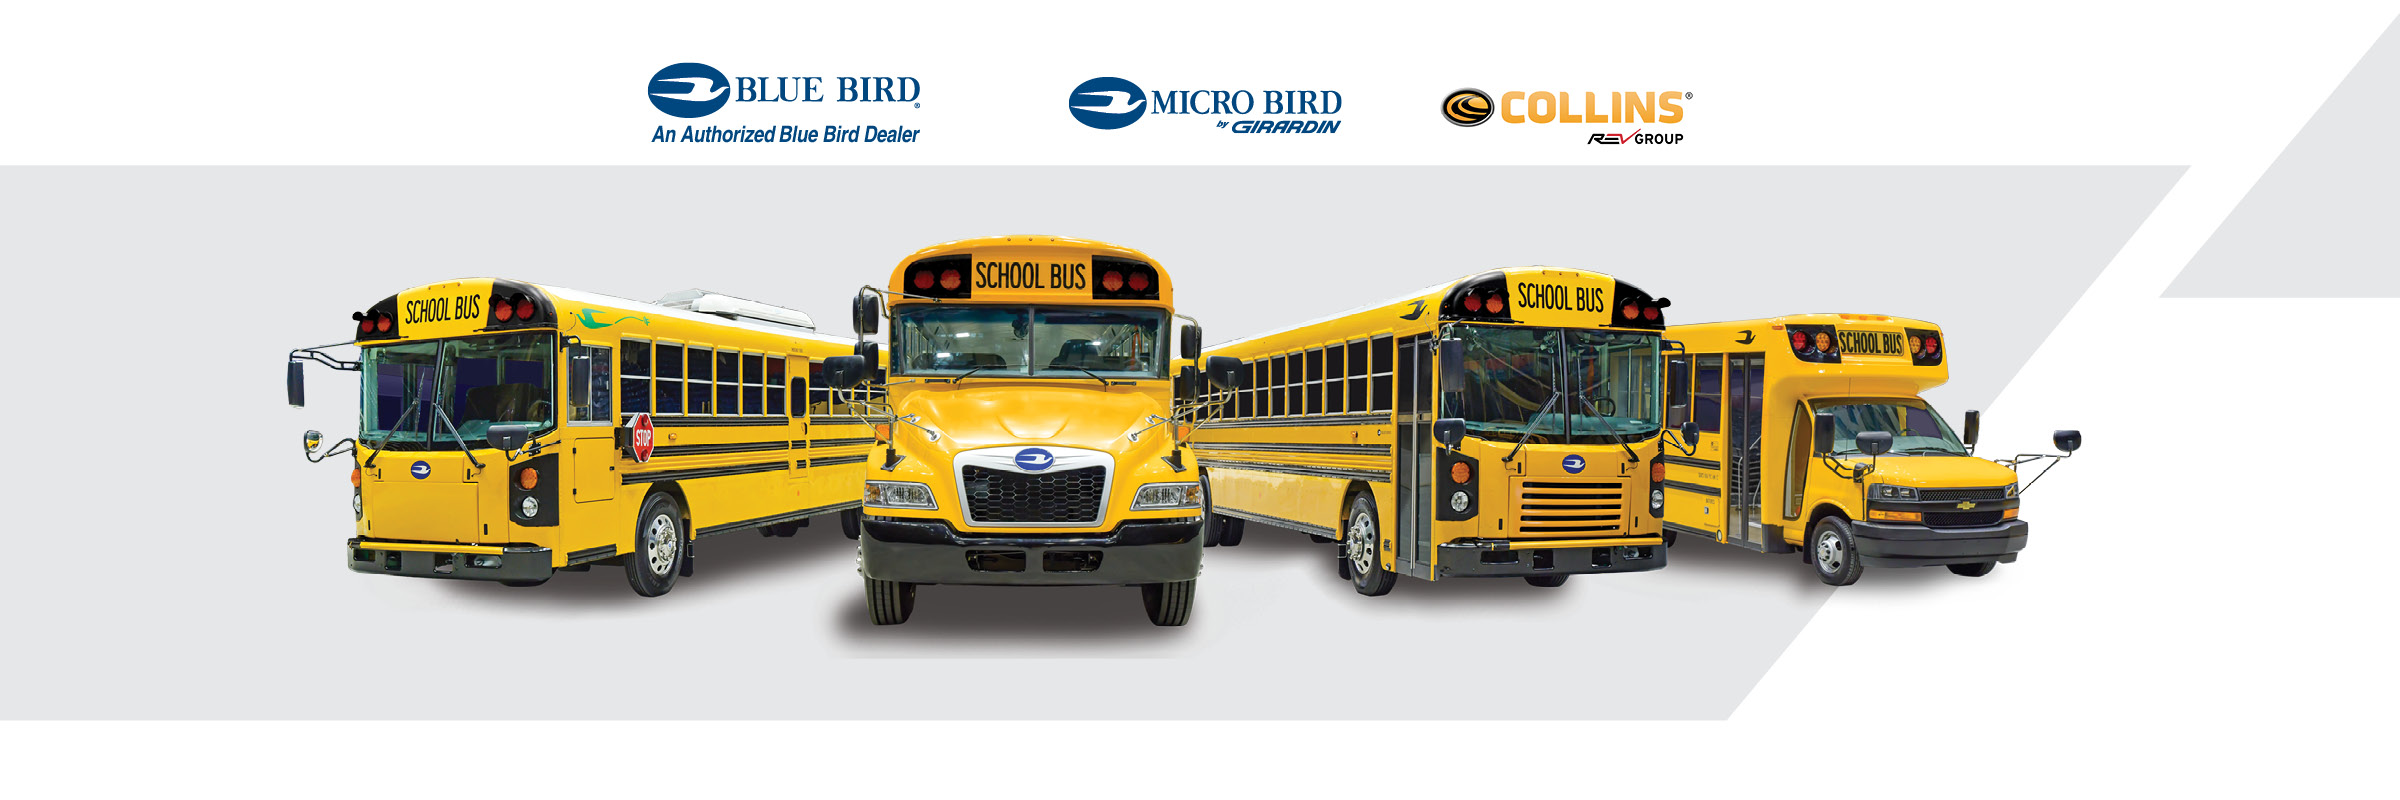 Blue Bird, Micro Bird and Collins buses with brand logos